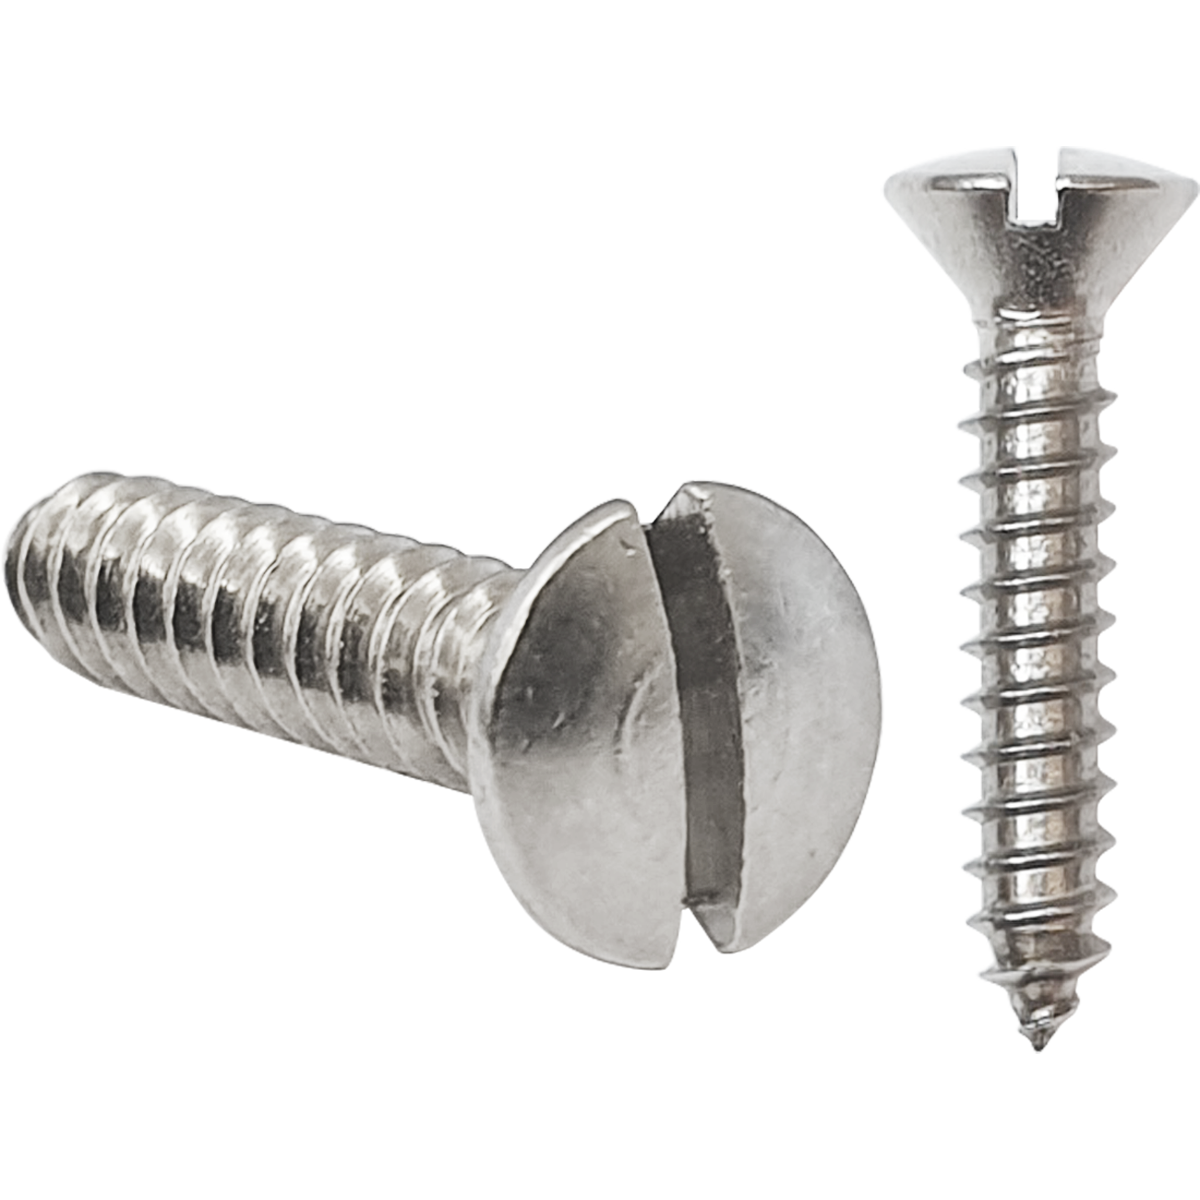 Corrosion-resistant self-tapping, raised countersunk screws, known as self-tappers, available in various diameters and lengths